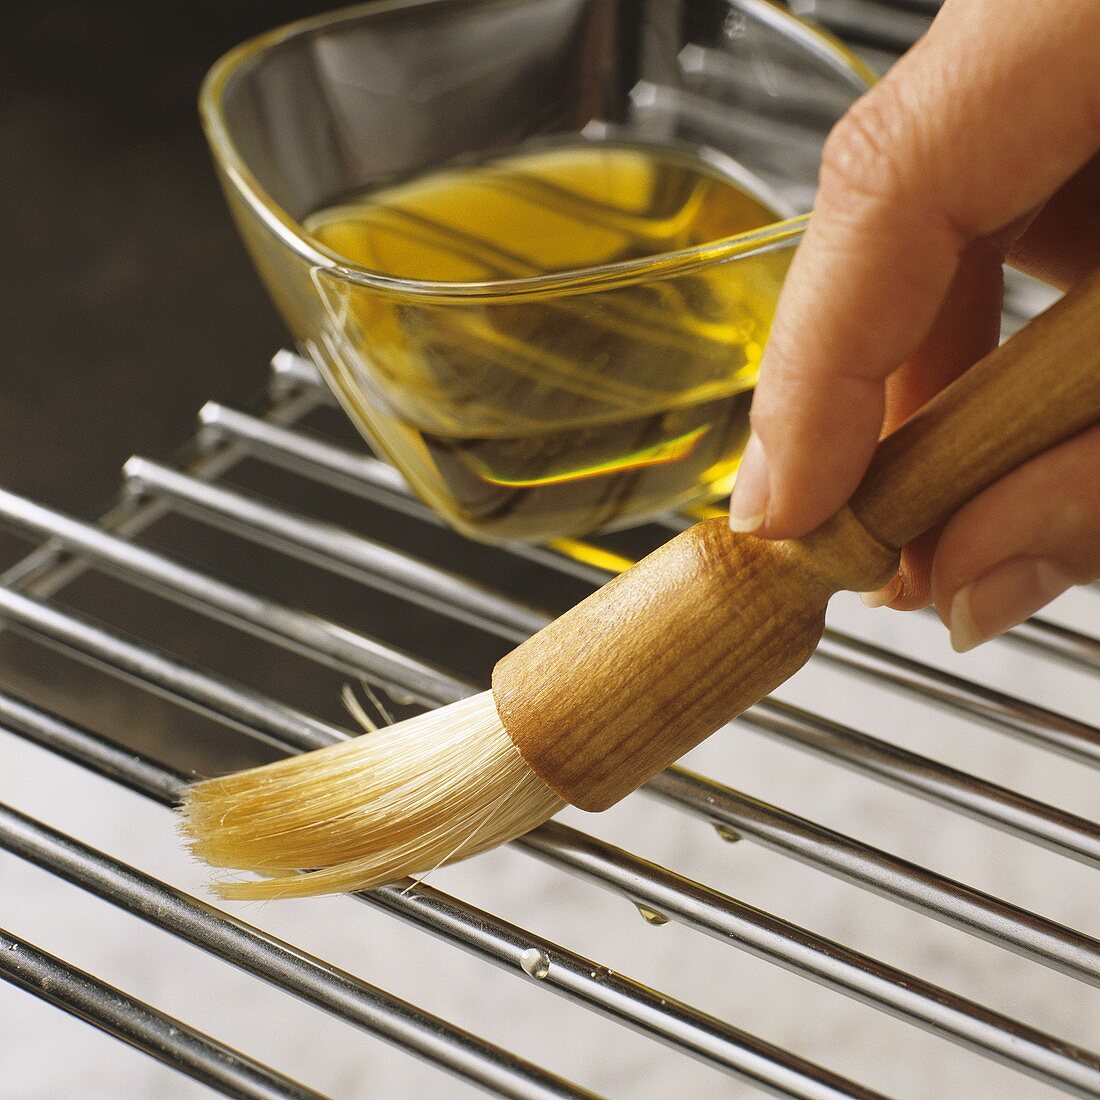 Brushing grill rack with oil